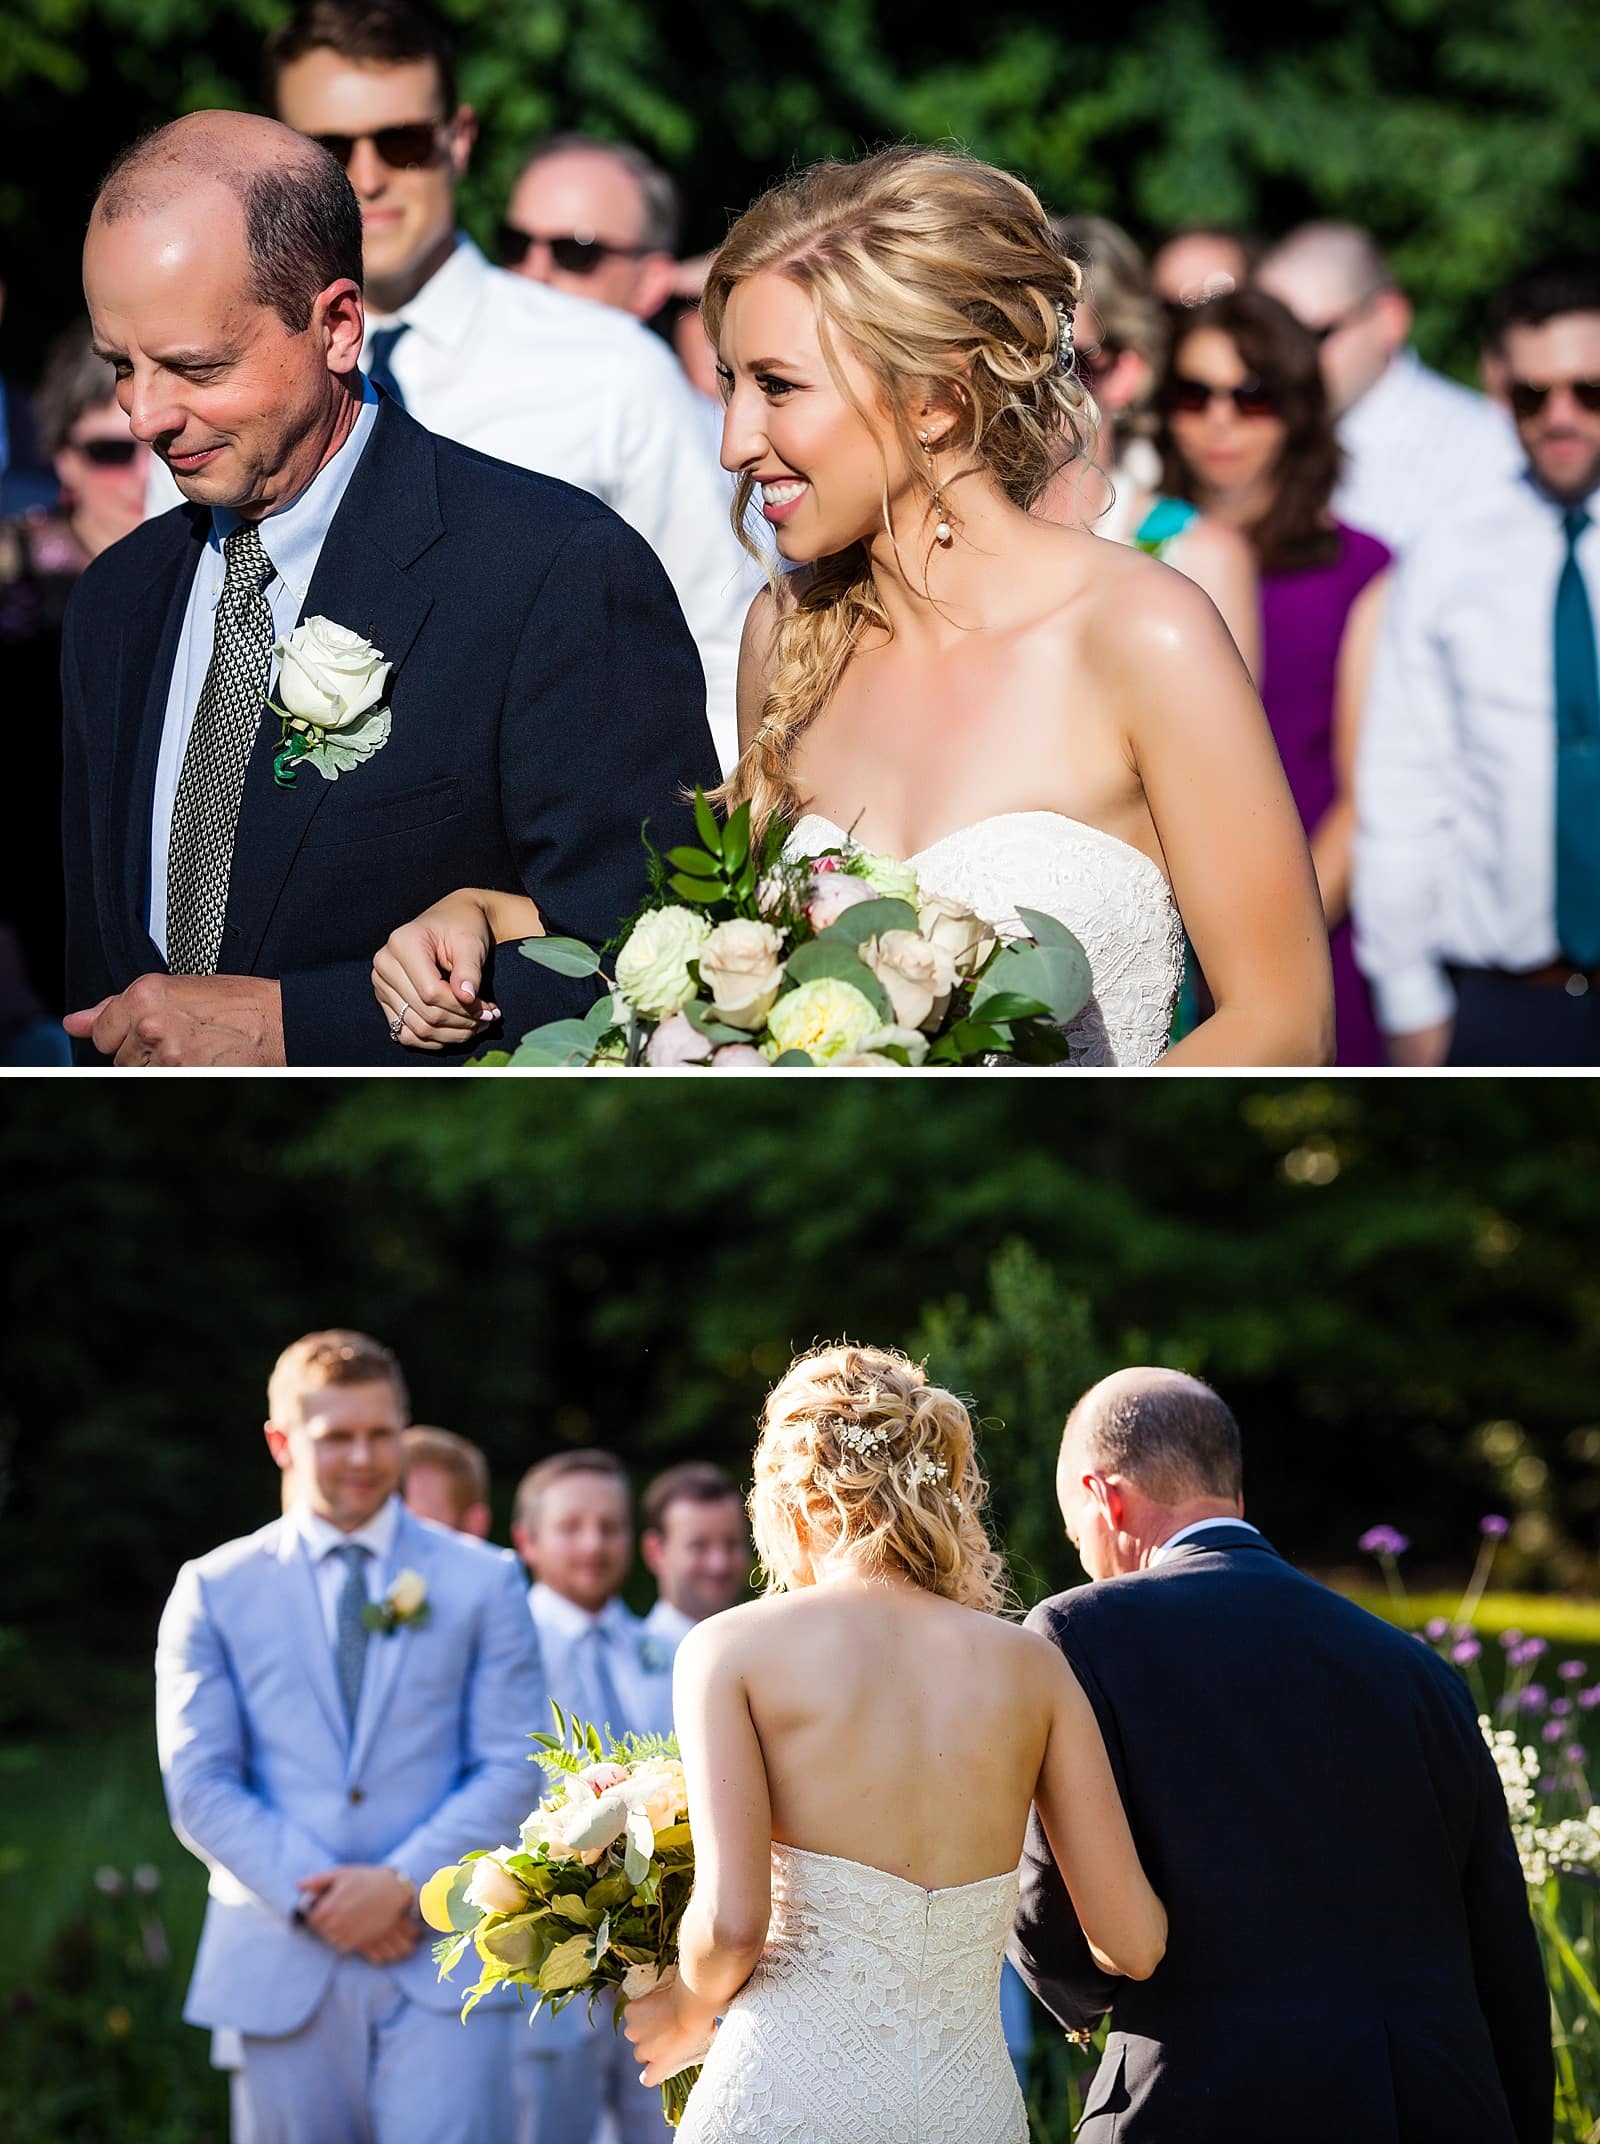 wedding ceremony, outdoor wedding, bride walking down the aisle, first look, bride and groom